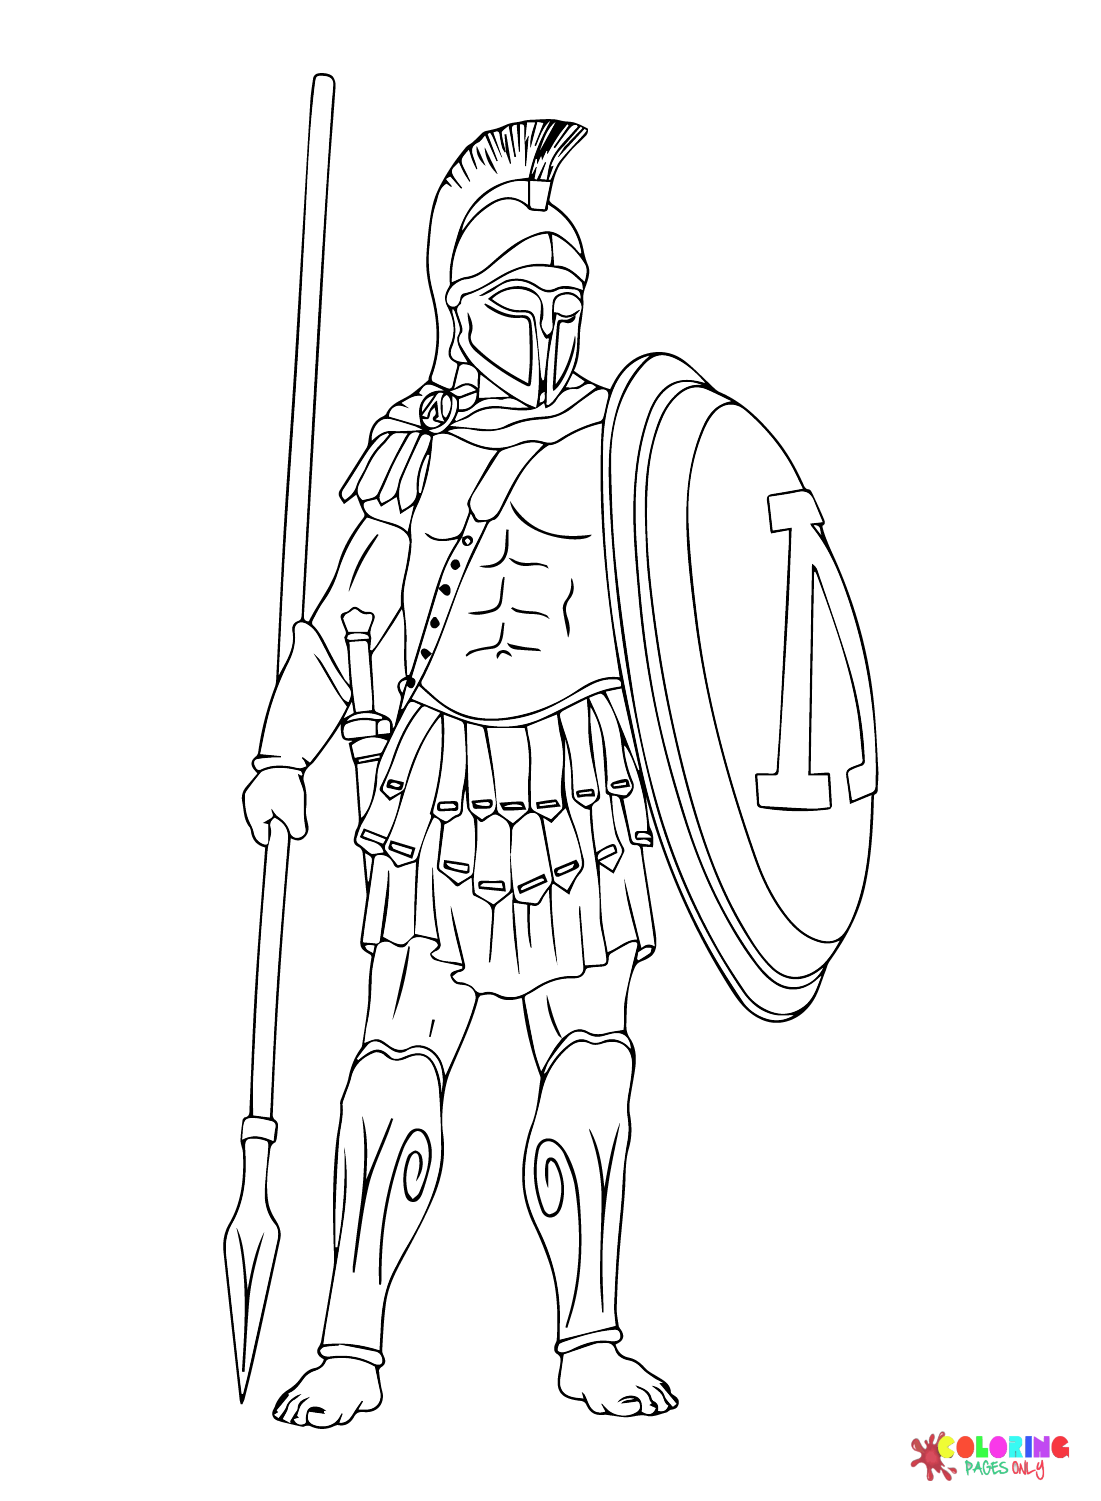 Vector Ancient Greek Warrior with a Spears and Shields in Their Hands Coloring Page